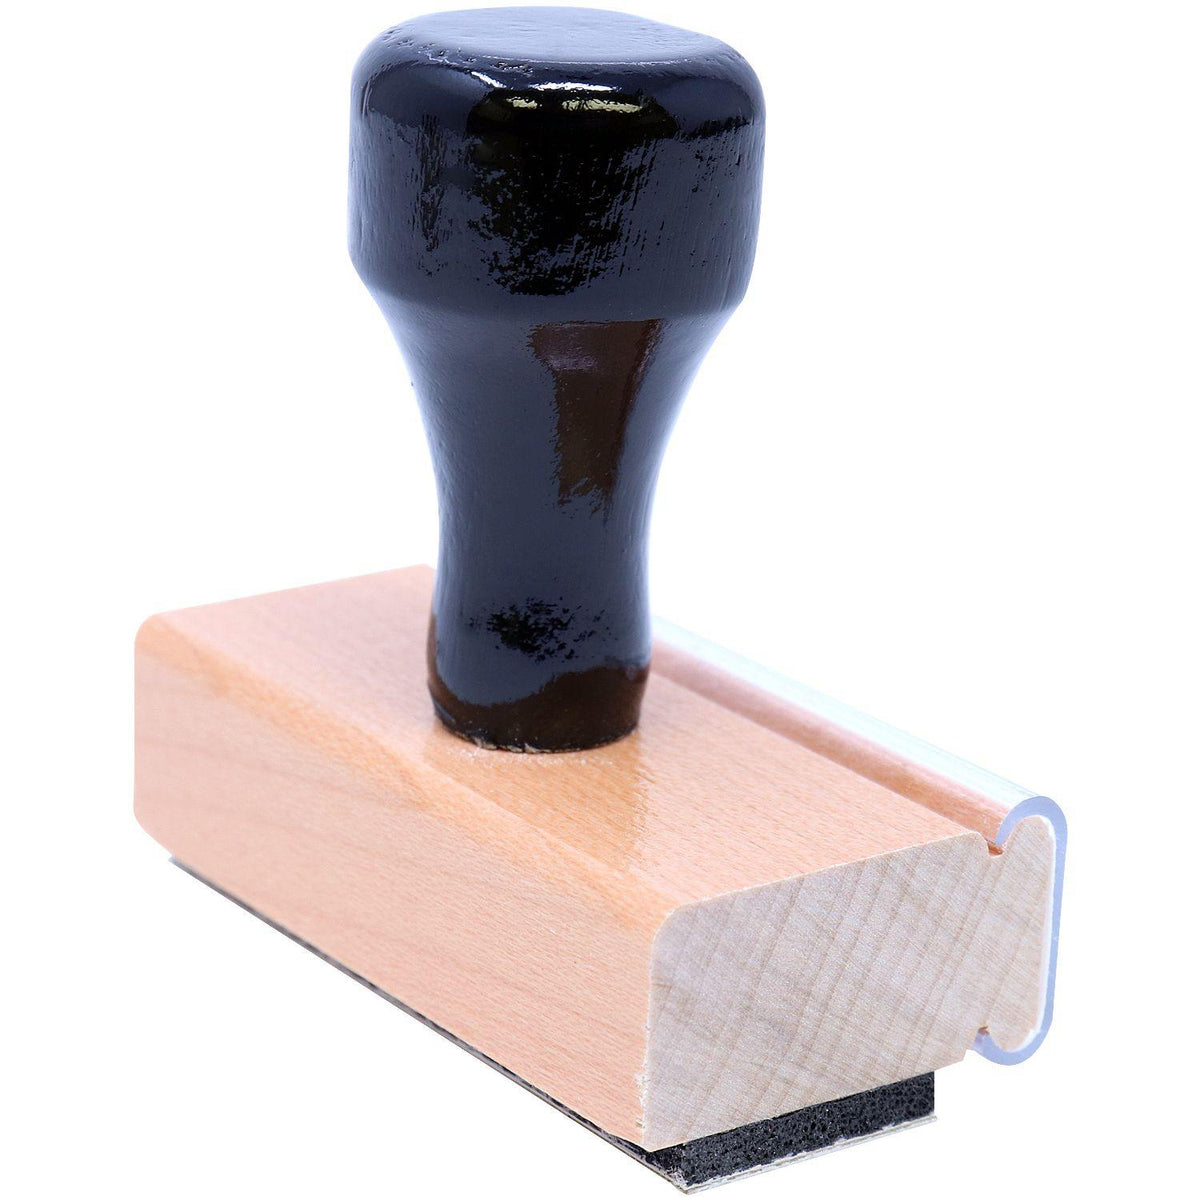 Large Temporarily Closed Rubber Stamp - Engineer Seal Stamps - Brand_Acorn, Impression Size_Large, Stamp Type_Regular Stamp, Type of Use_Business, Type of Use_General, Type of Use_Medical Office